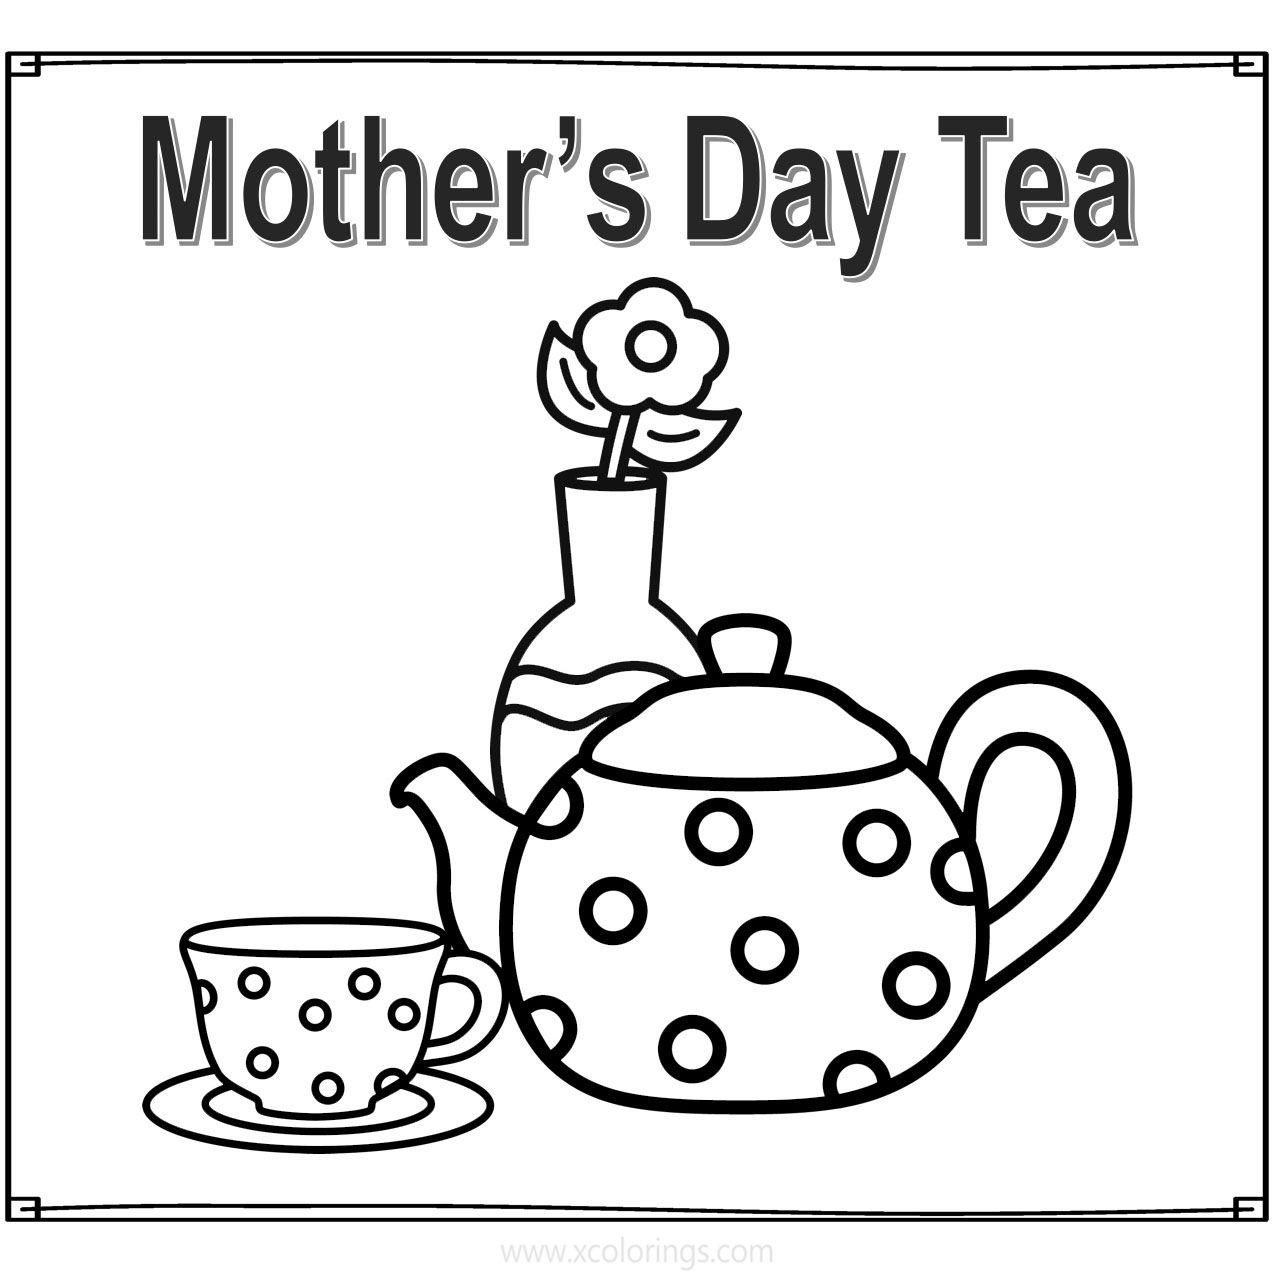 Free Mother's Day Tea Coloring Pages printable